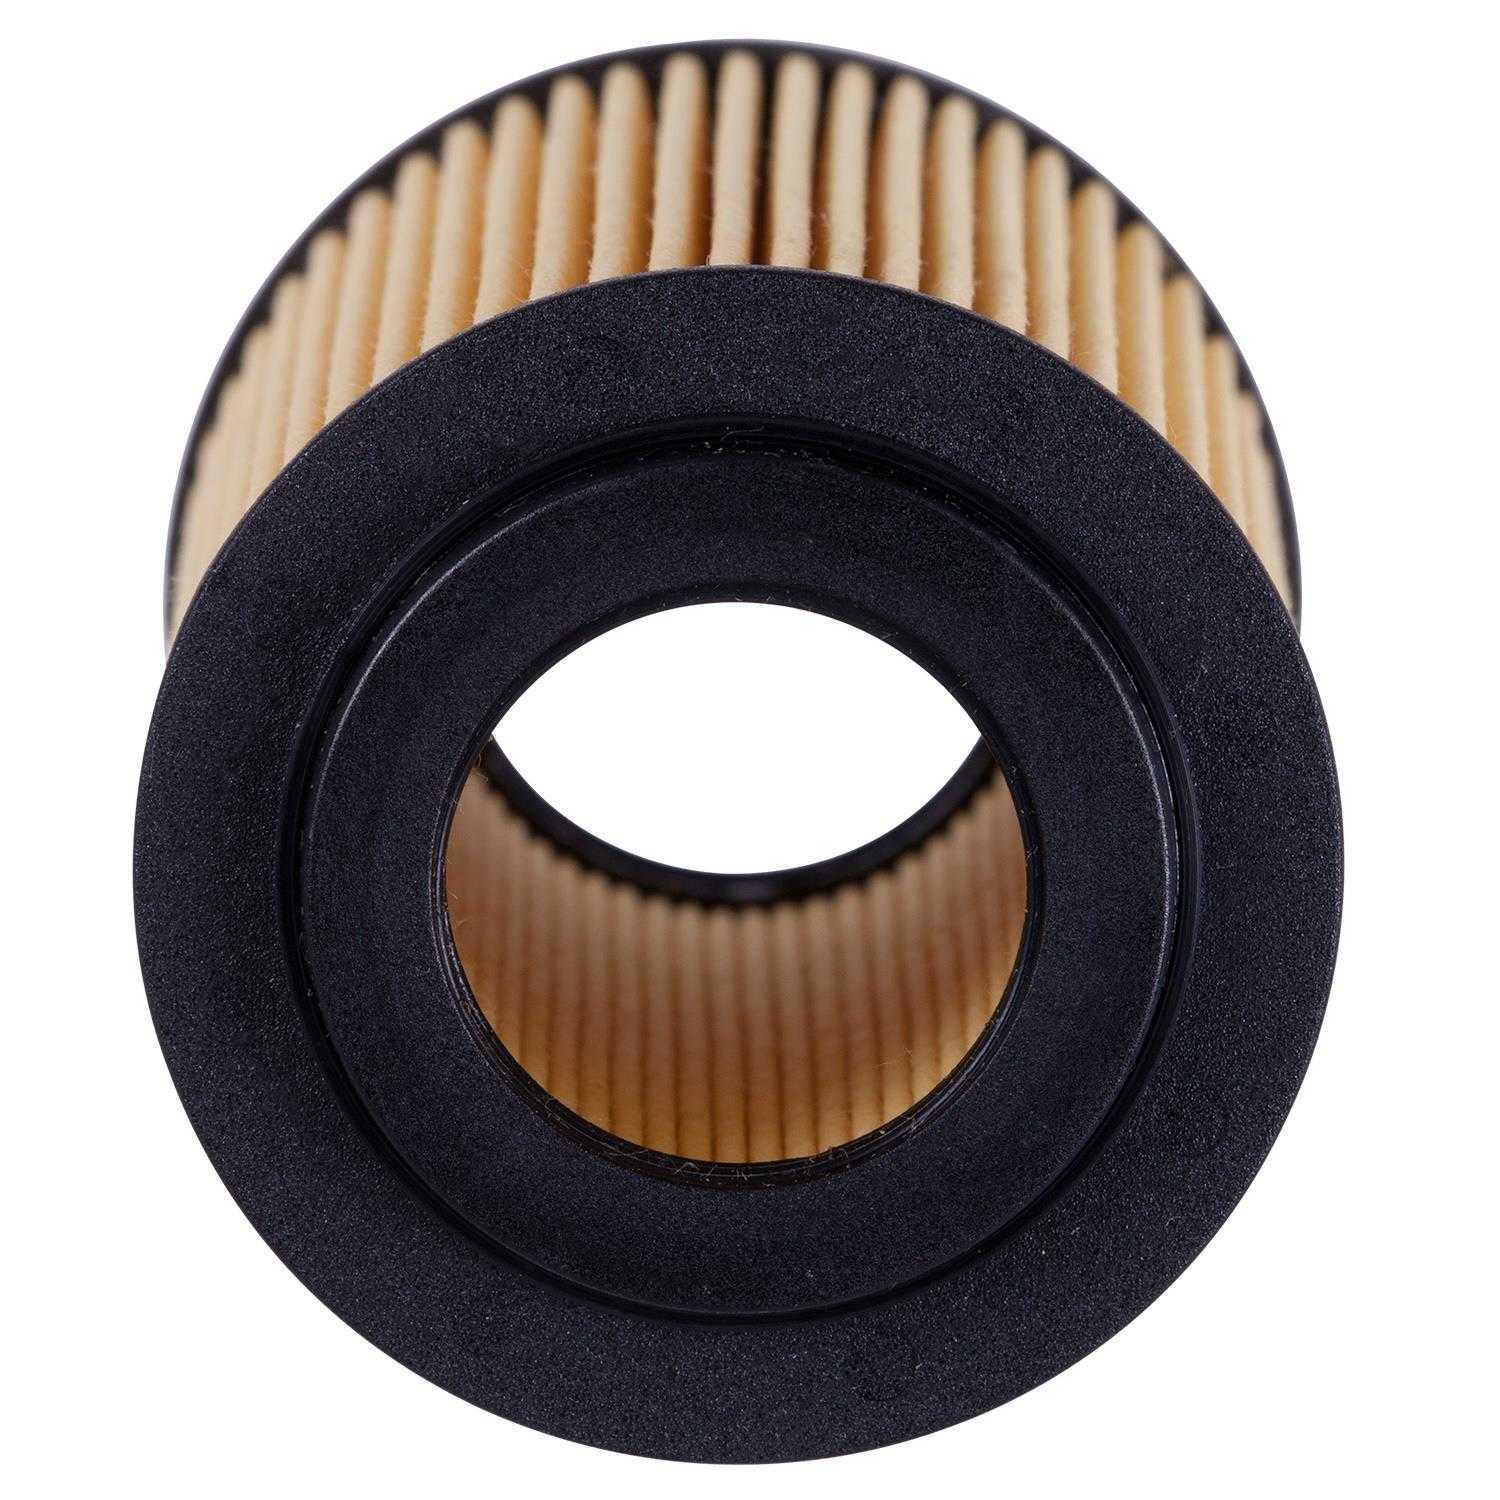 PRONTO/ID USA - Extended Life Oil Filter - PNP PO5277EX